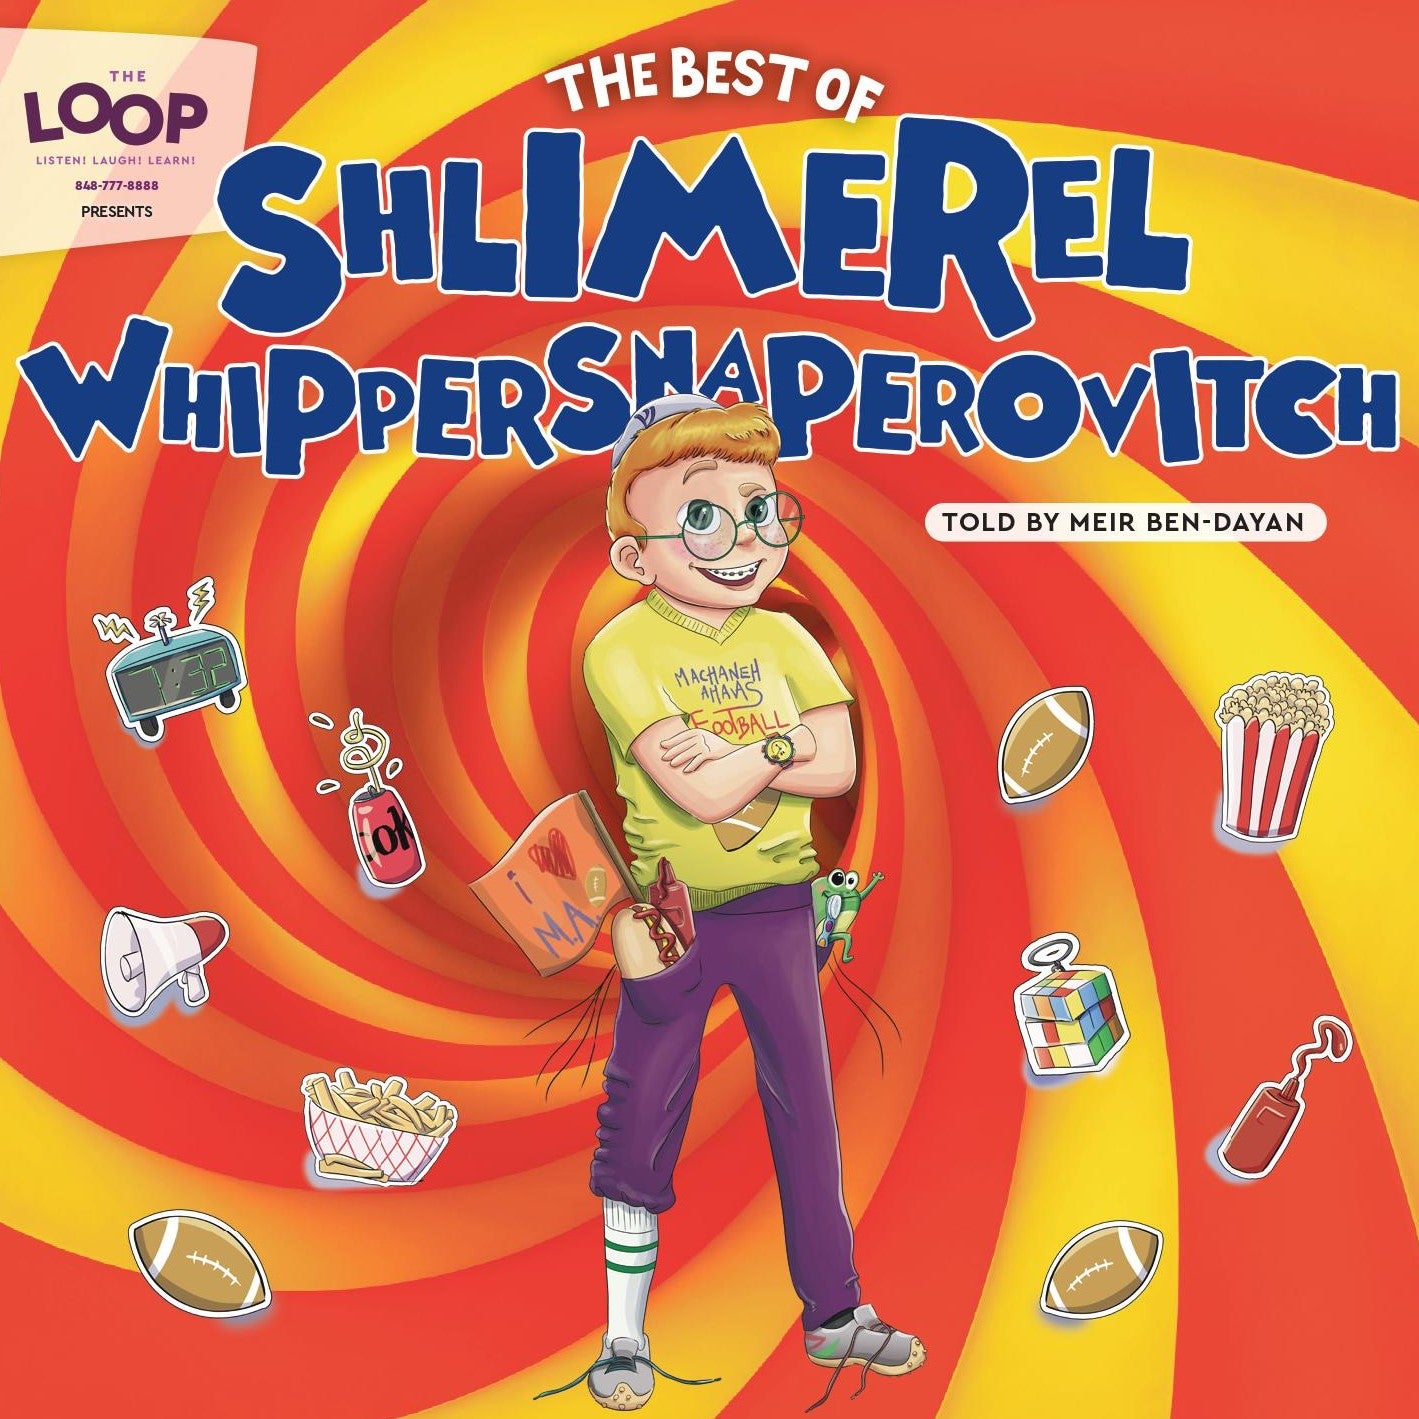 The Loop - The Best Of Shlimerel Whippersnaperovitch Ft. Meir Ben-Dayan